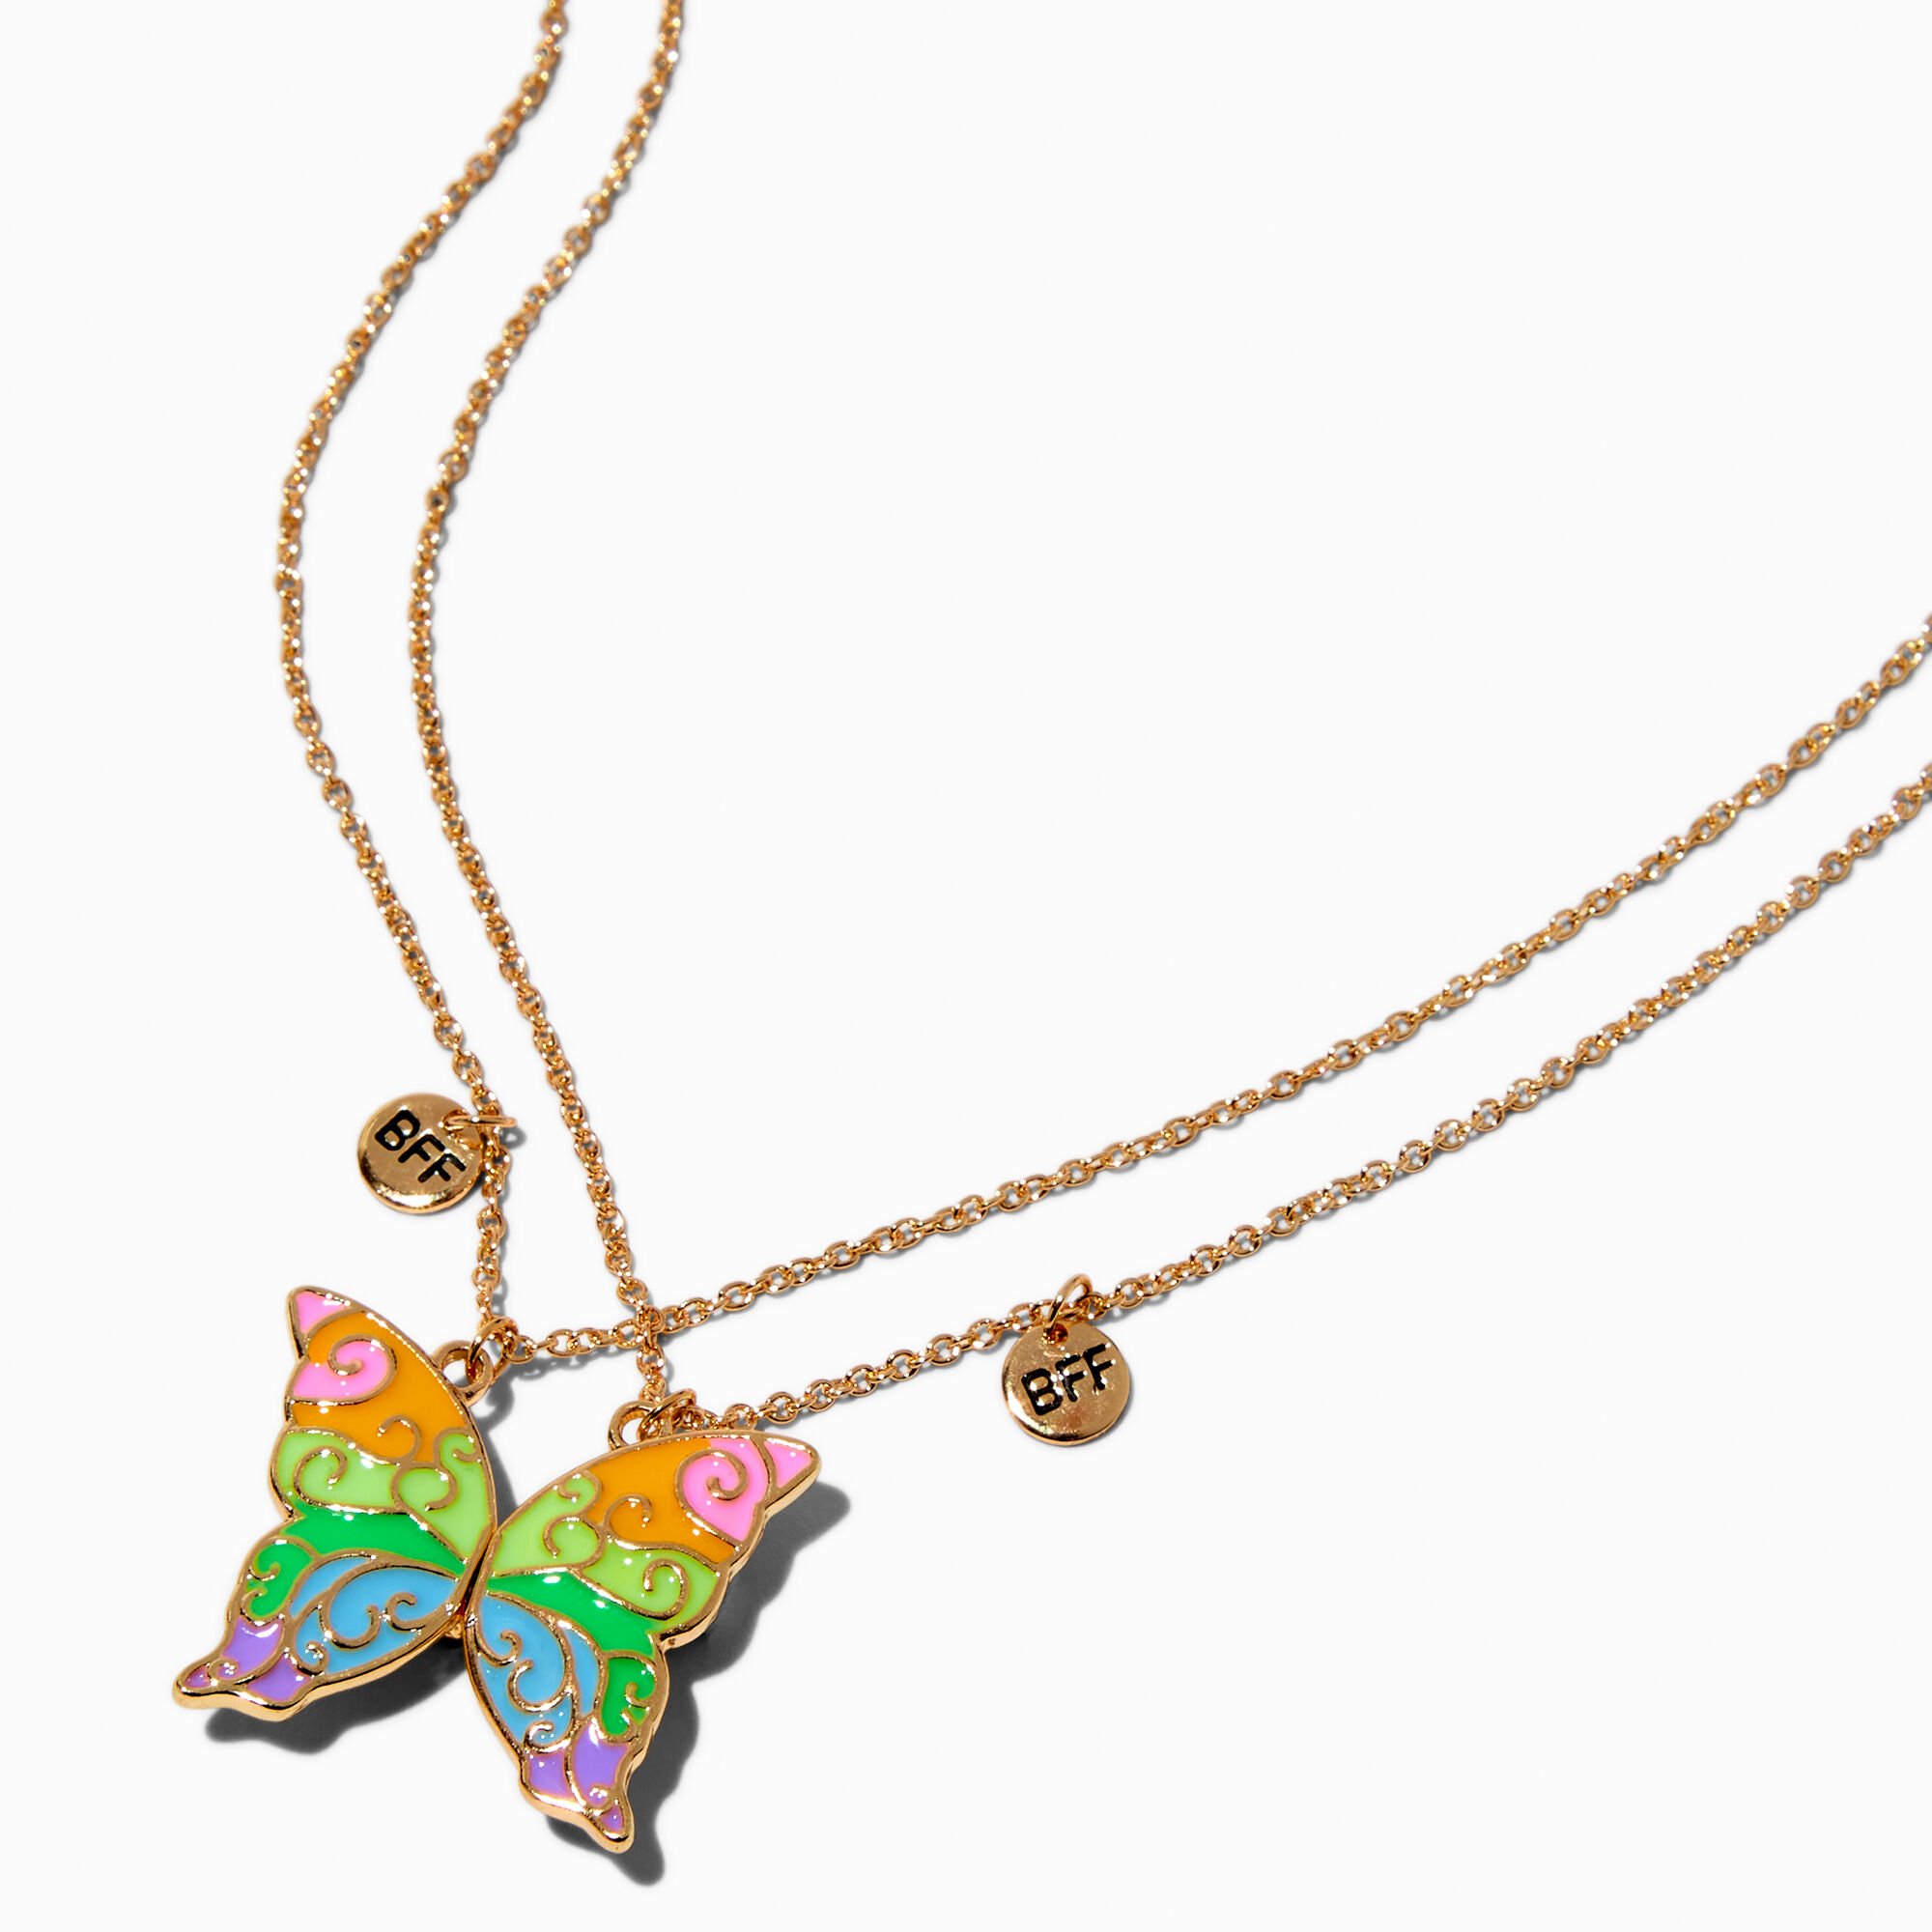 View Claires Best Friends Rainbow Butterfly Pendant Necklaces 2 Pack Gold information